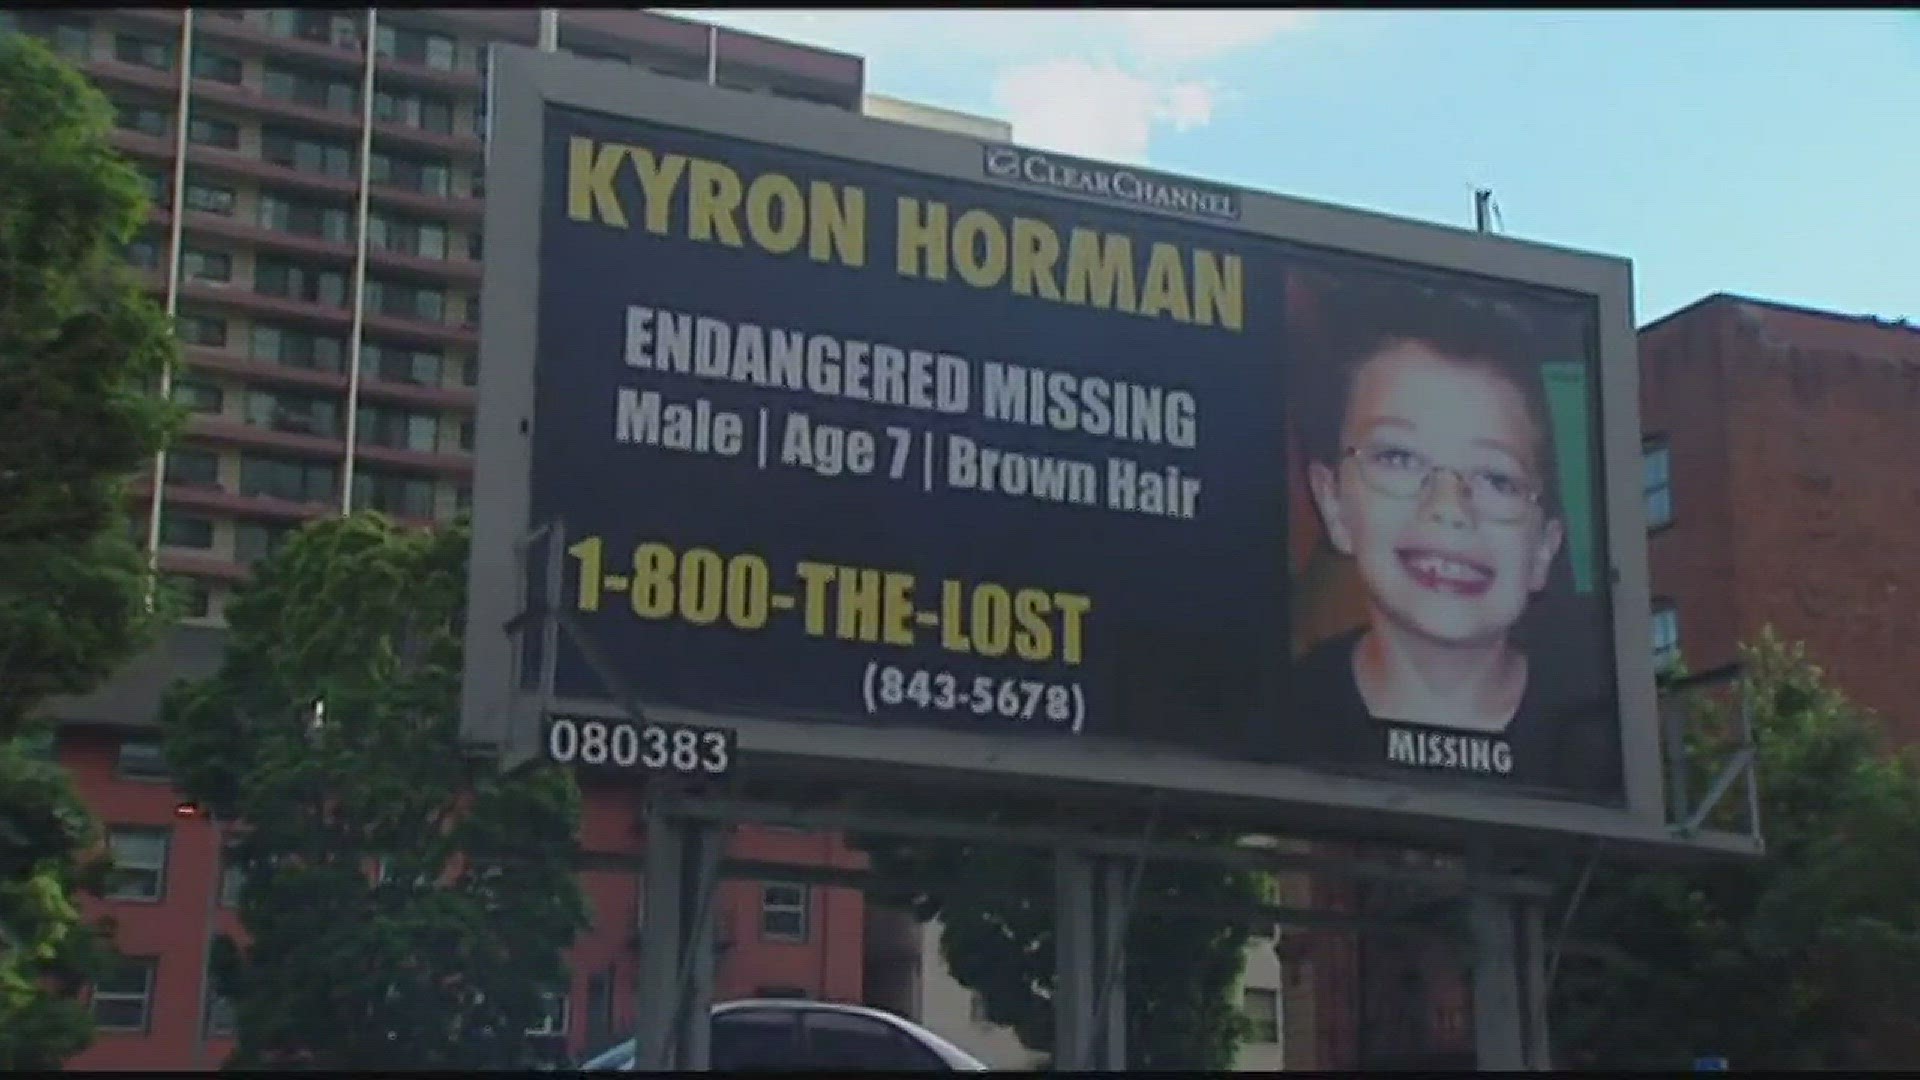 No new clues after Kyron Horman search